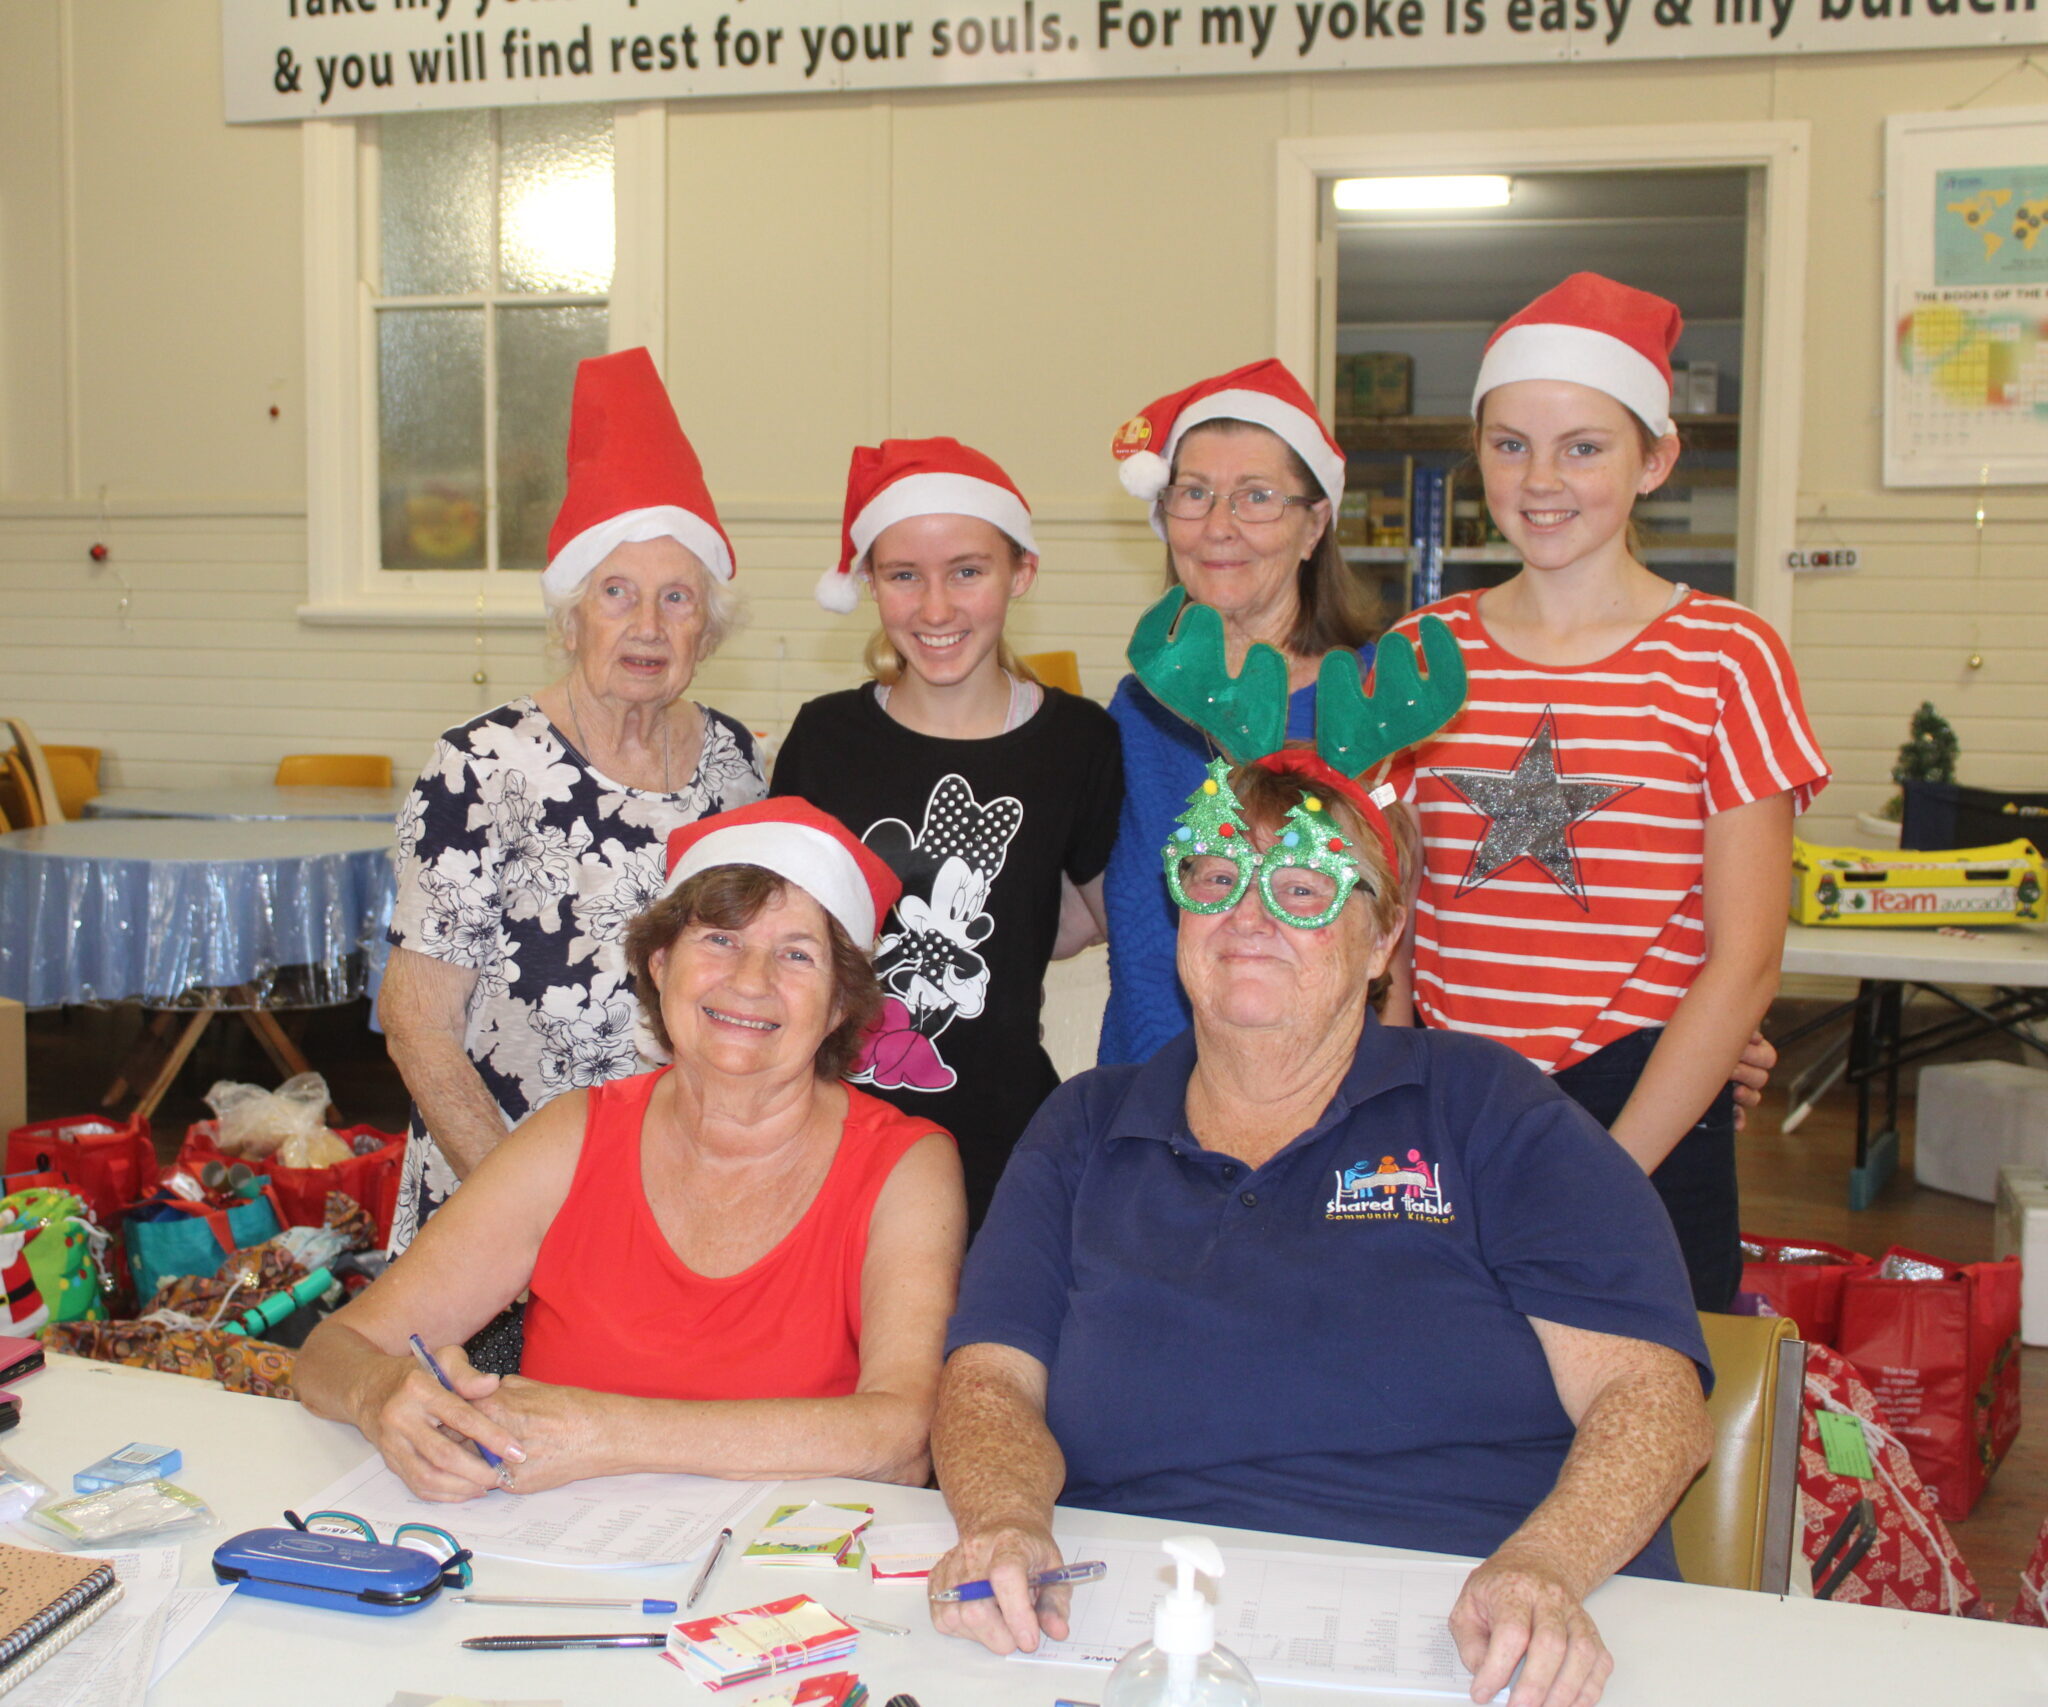 Shared Table helps provide Christmas cheer